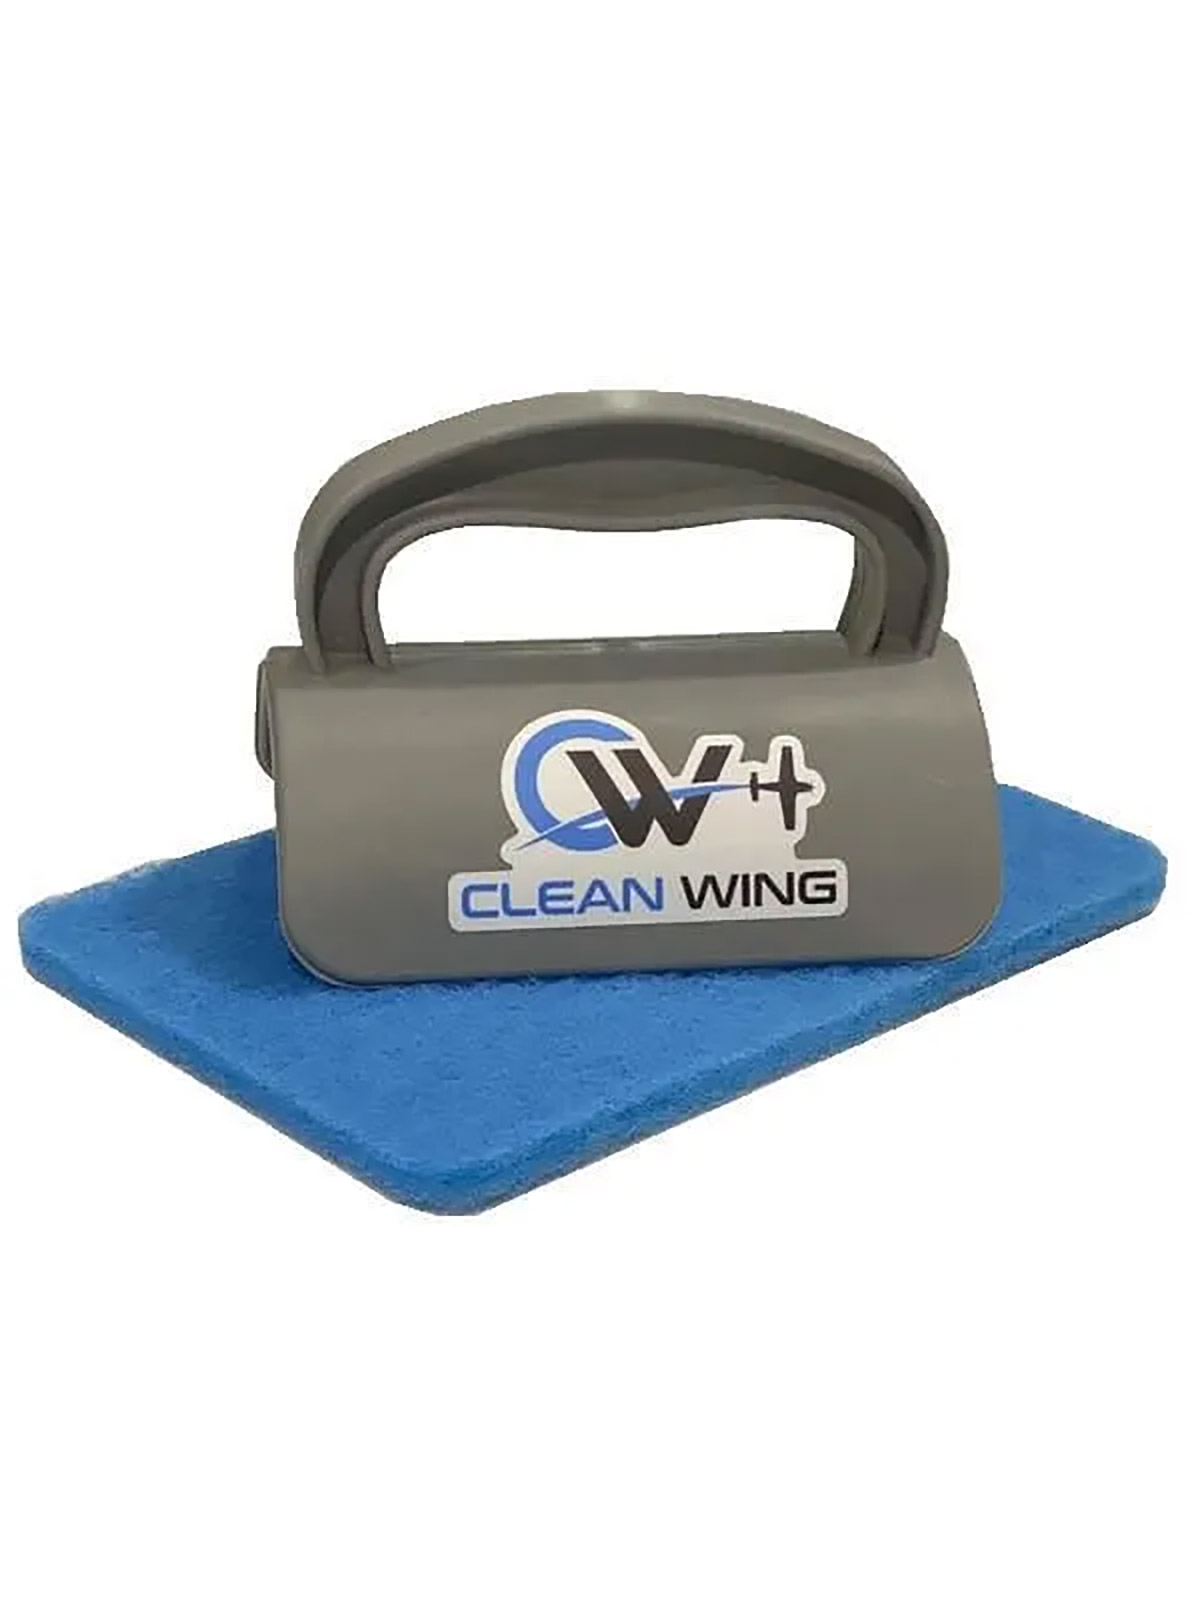 CleanWing Scrubber Kit